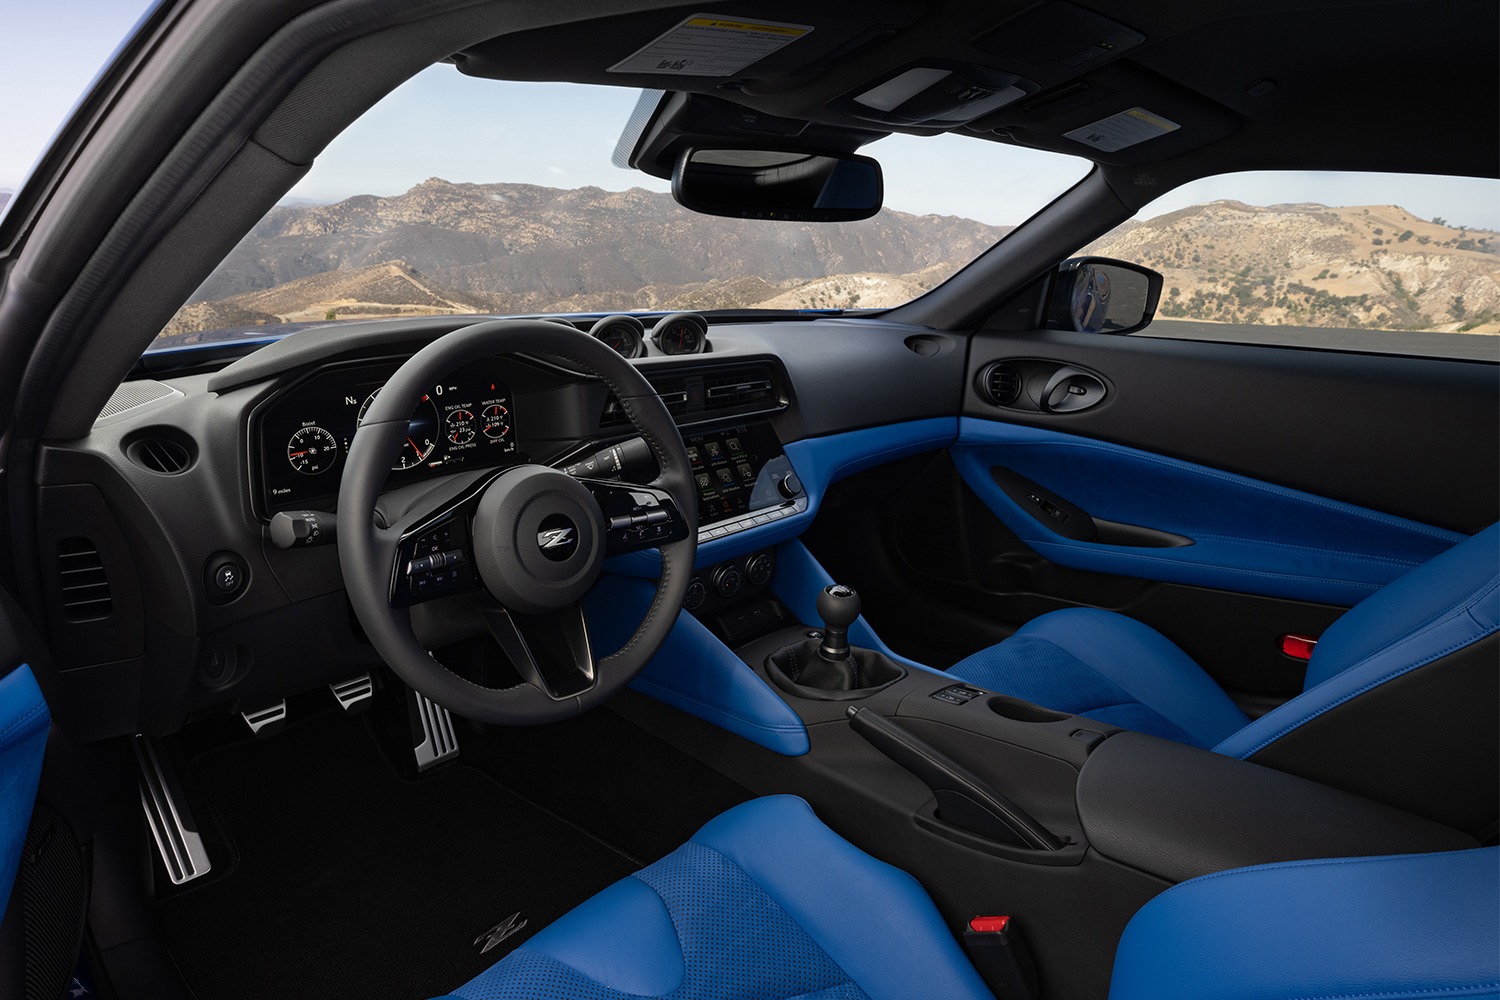 The interior of the 2023 Nissan Z, a two-door sports car